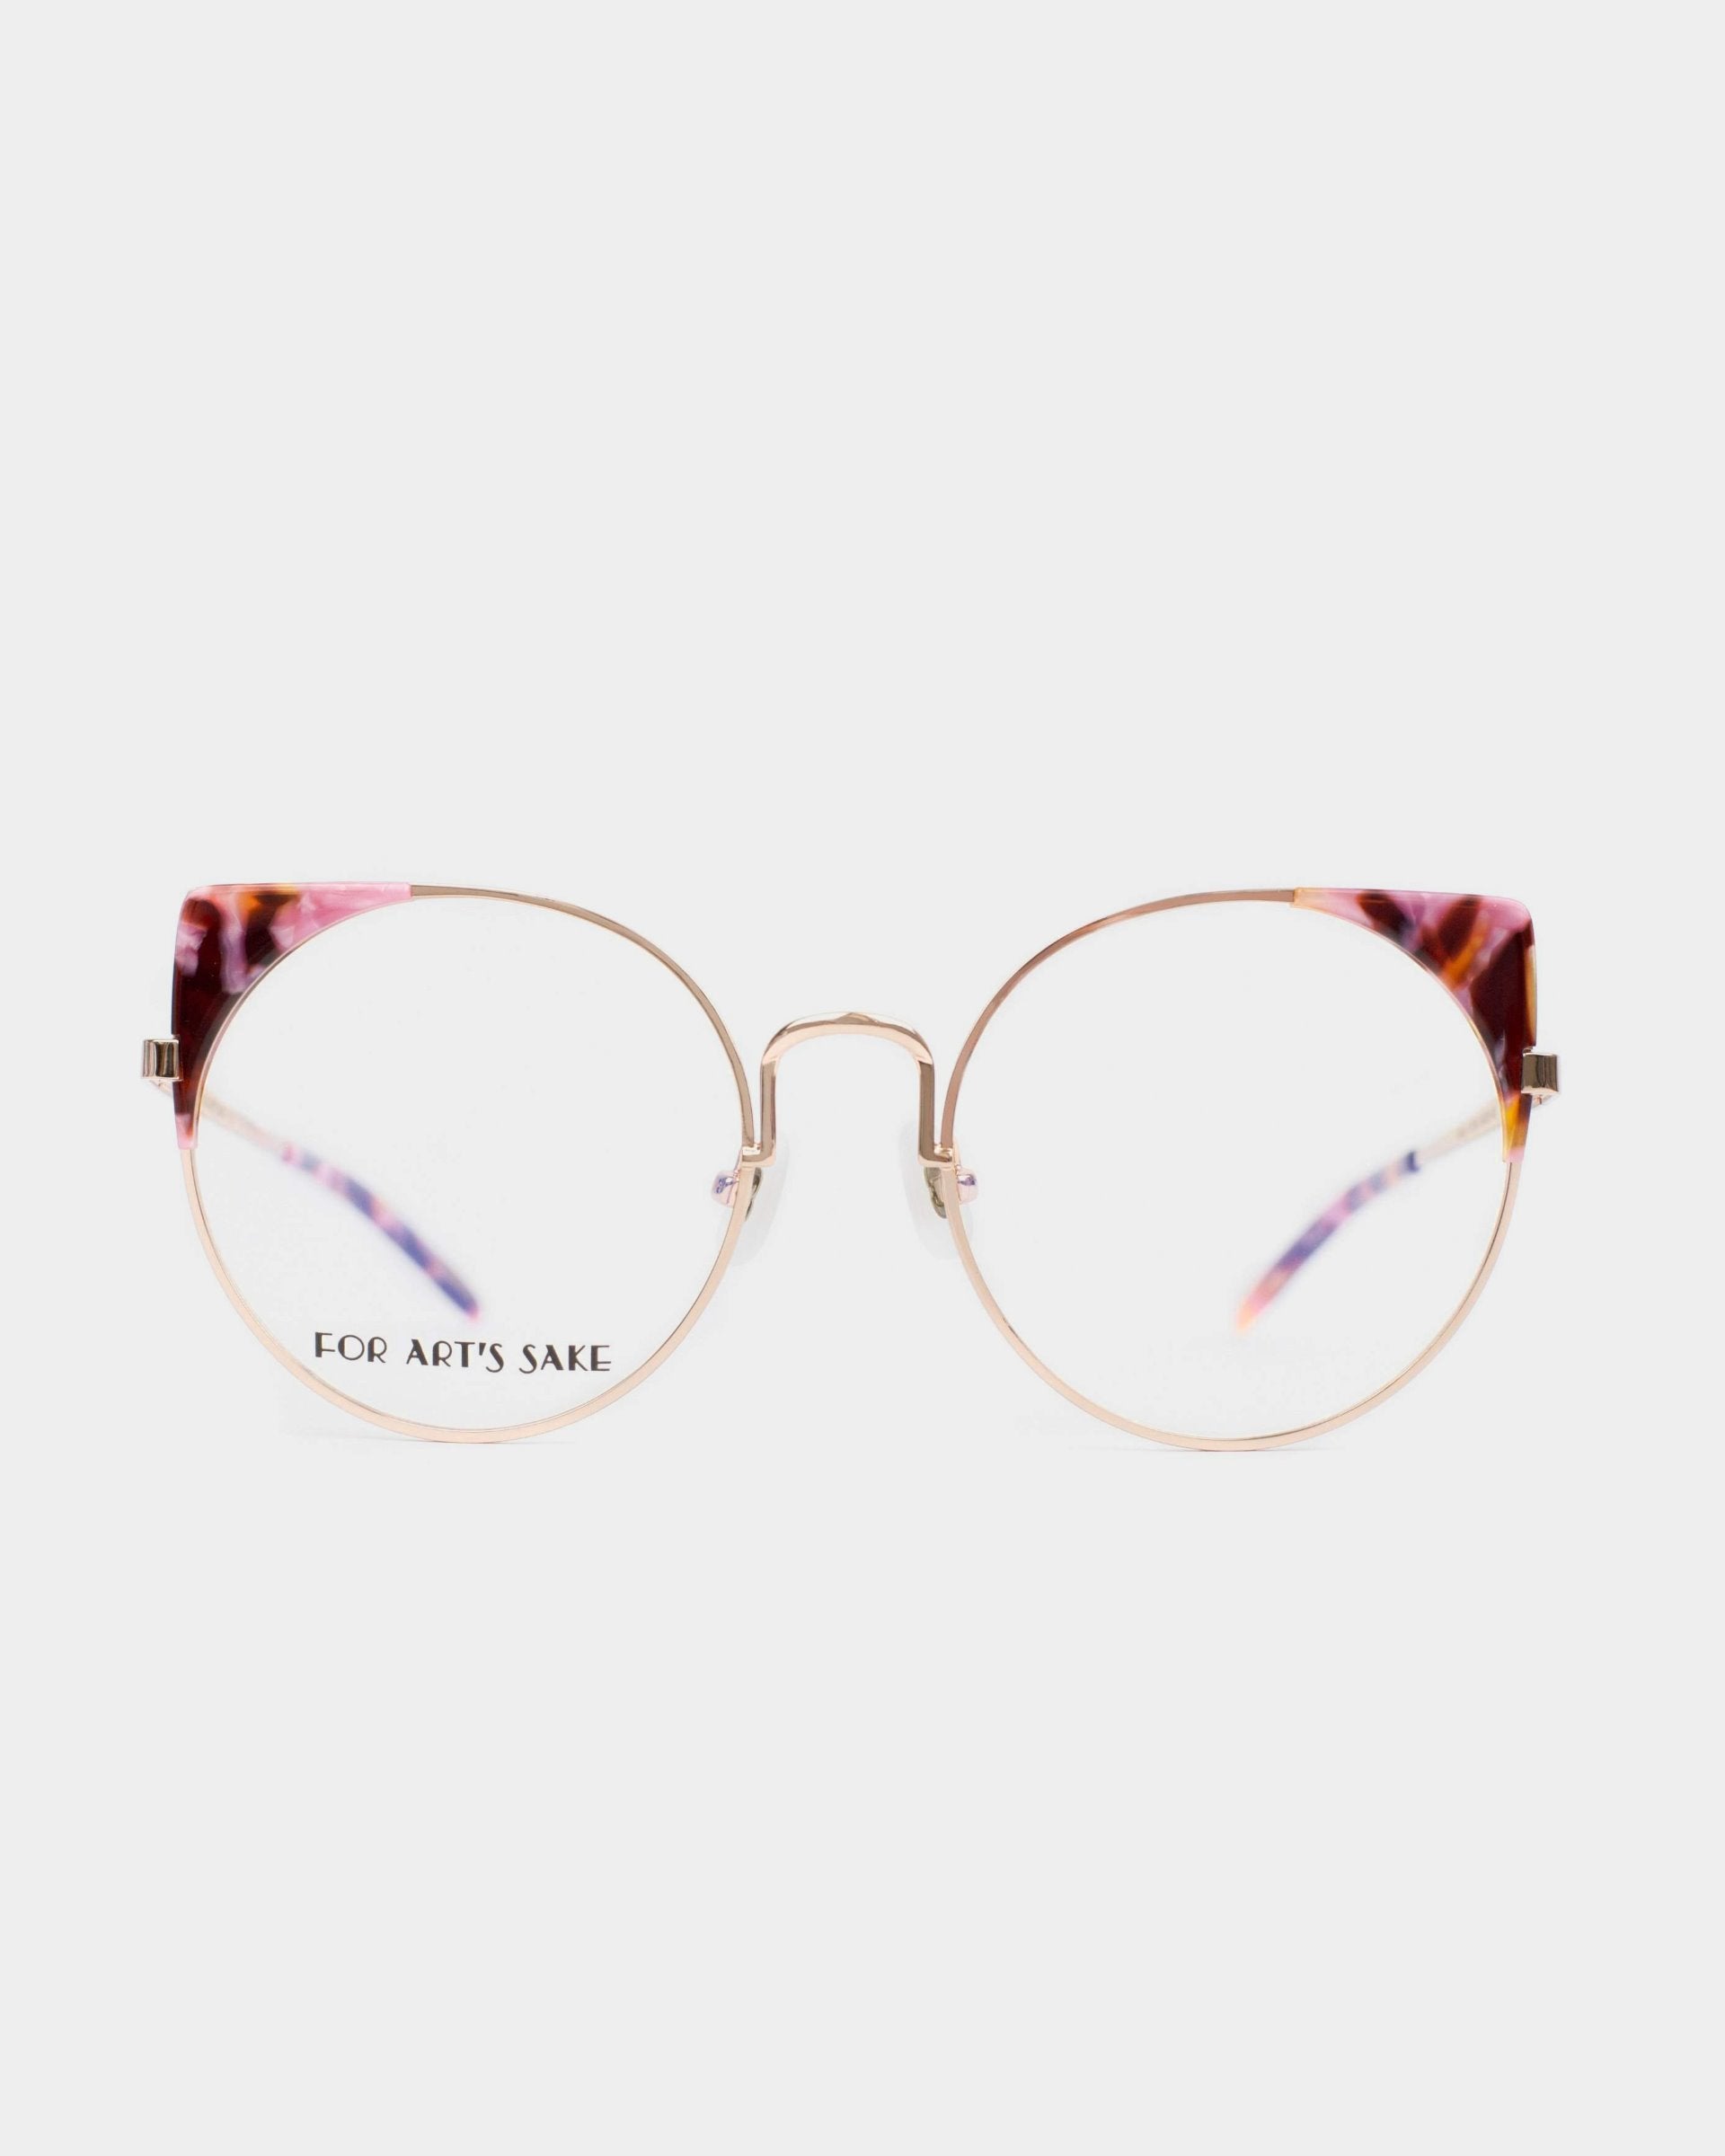 A pair of stylish Brisky eyeglasses with gold metal rims and round lenses. The top part of the frames features a pink and black marbled pattern, and the brand name "For Art's Sake®" is visible on the left lens. These glasses come with a blue light filter for extra eye protection.